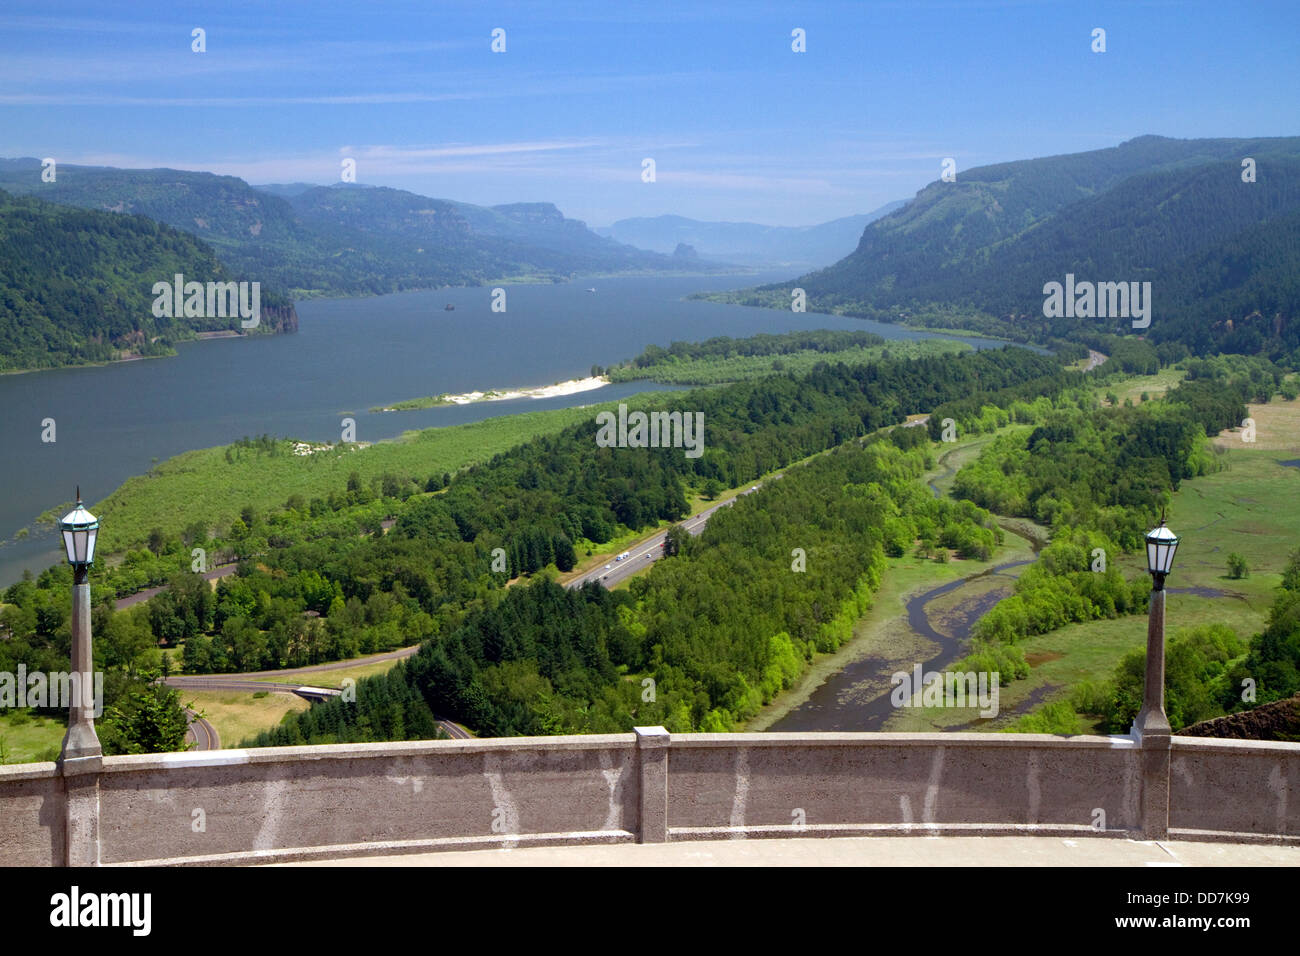 View of the Columbia River Gorge from a vista point east of Portland, Oregon, USA. Stock Photo